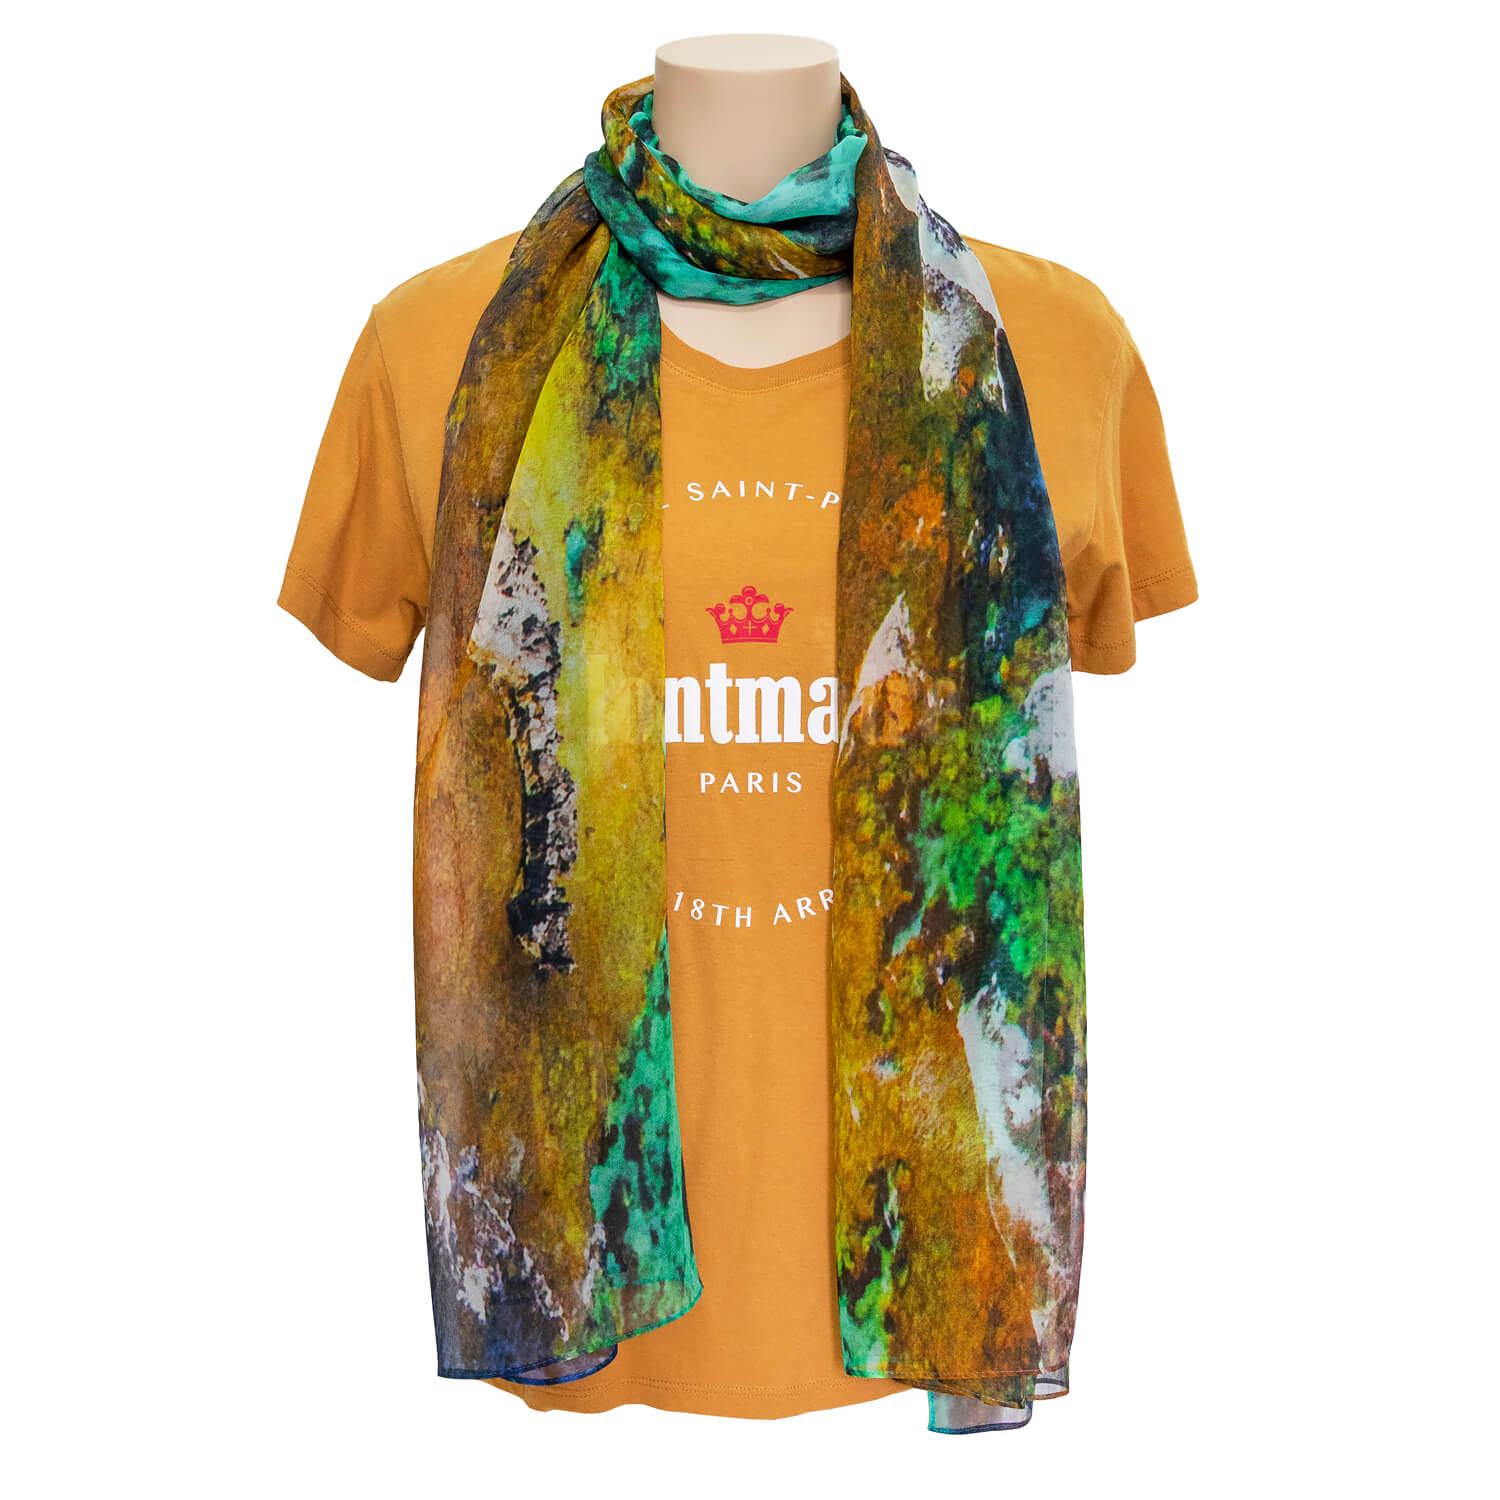 rotto reef wearable art silk scarf with mustard tee shirt